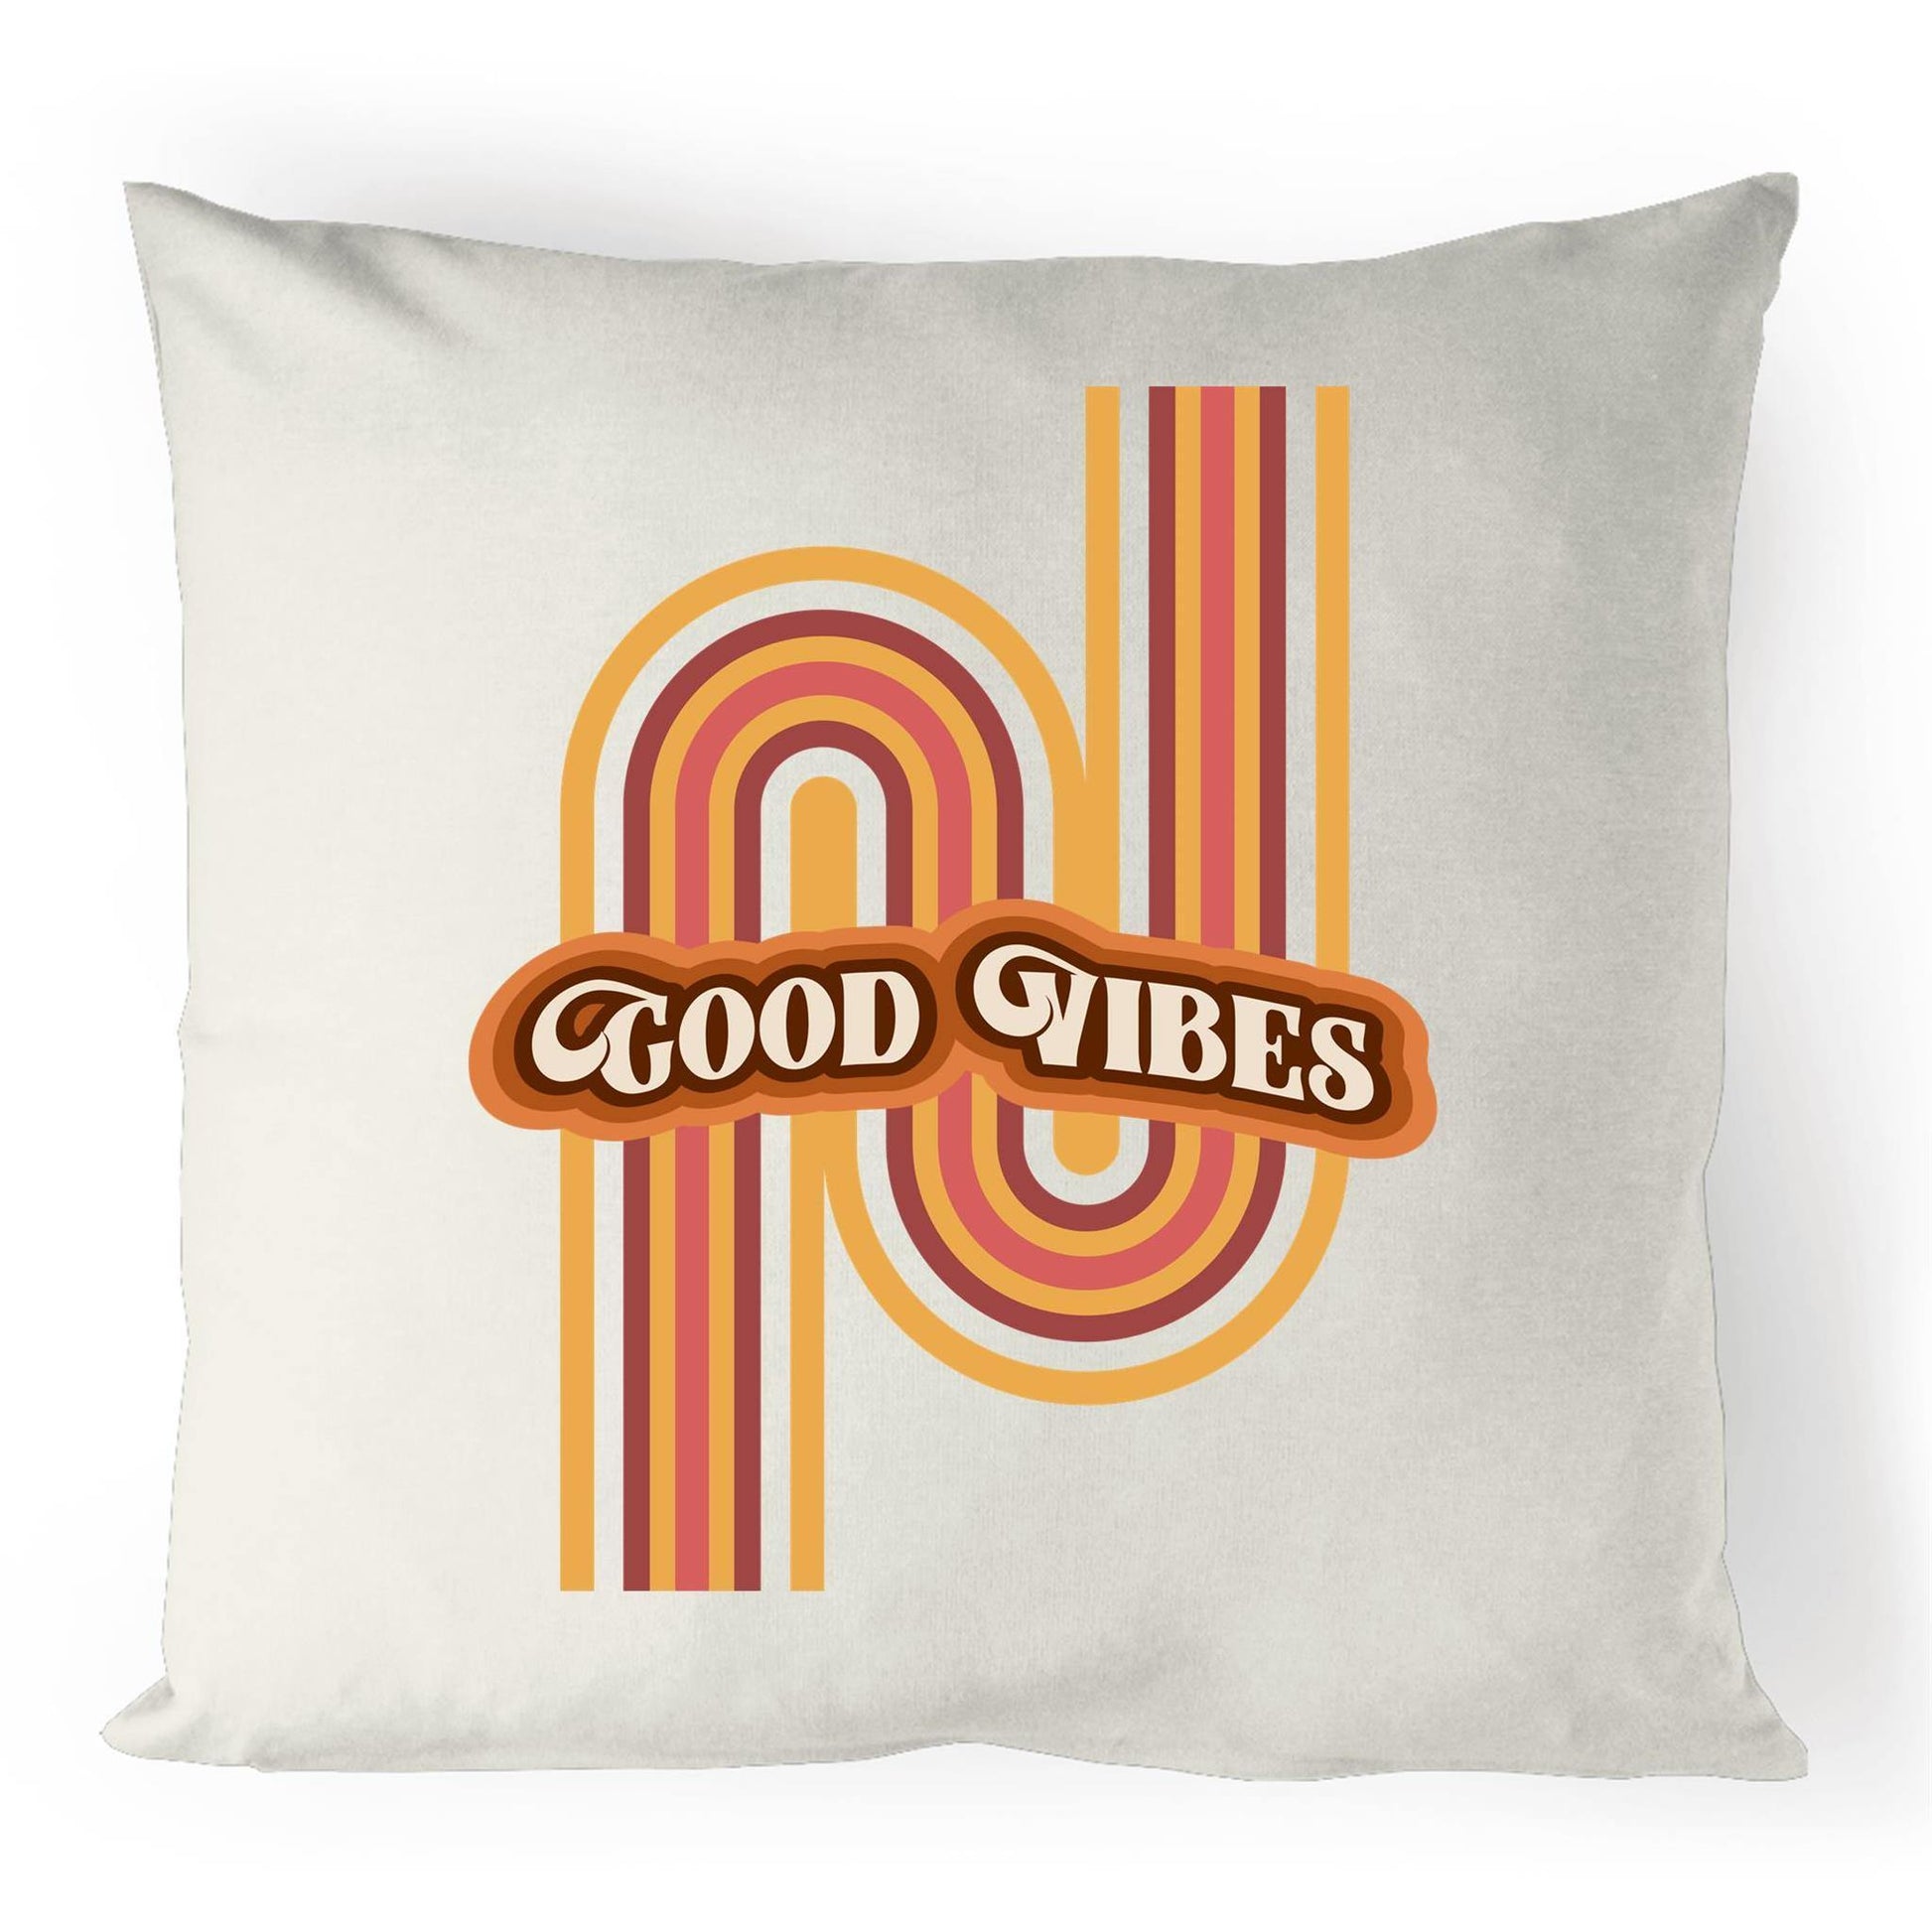 Good Vibes - 100% Linen Cushion Cover Natural One-Size Linen Cushion Cover Retro